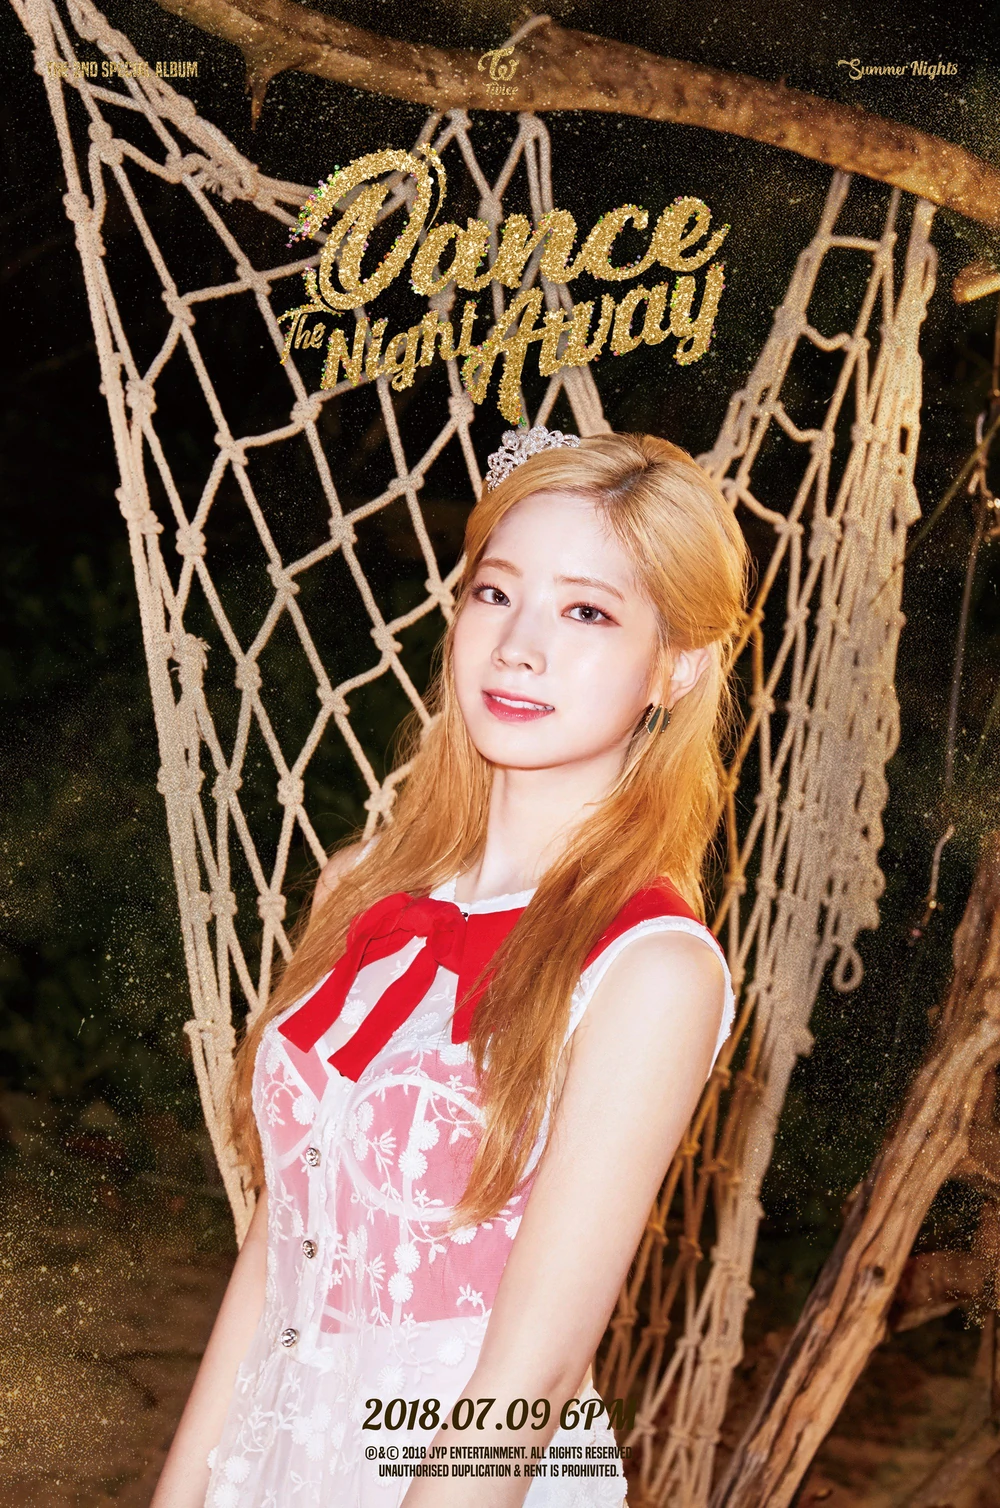 Twice Summer Nights Dahyun Concept Teaser Picture Image Photo Kpop K-Concept 1